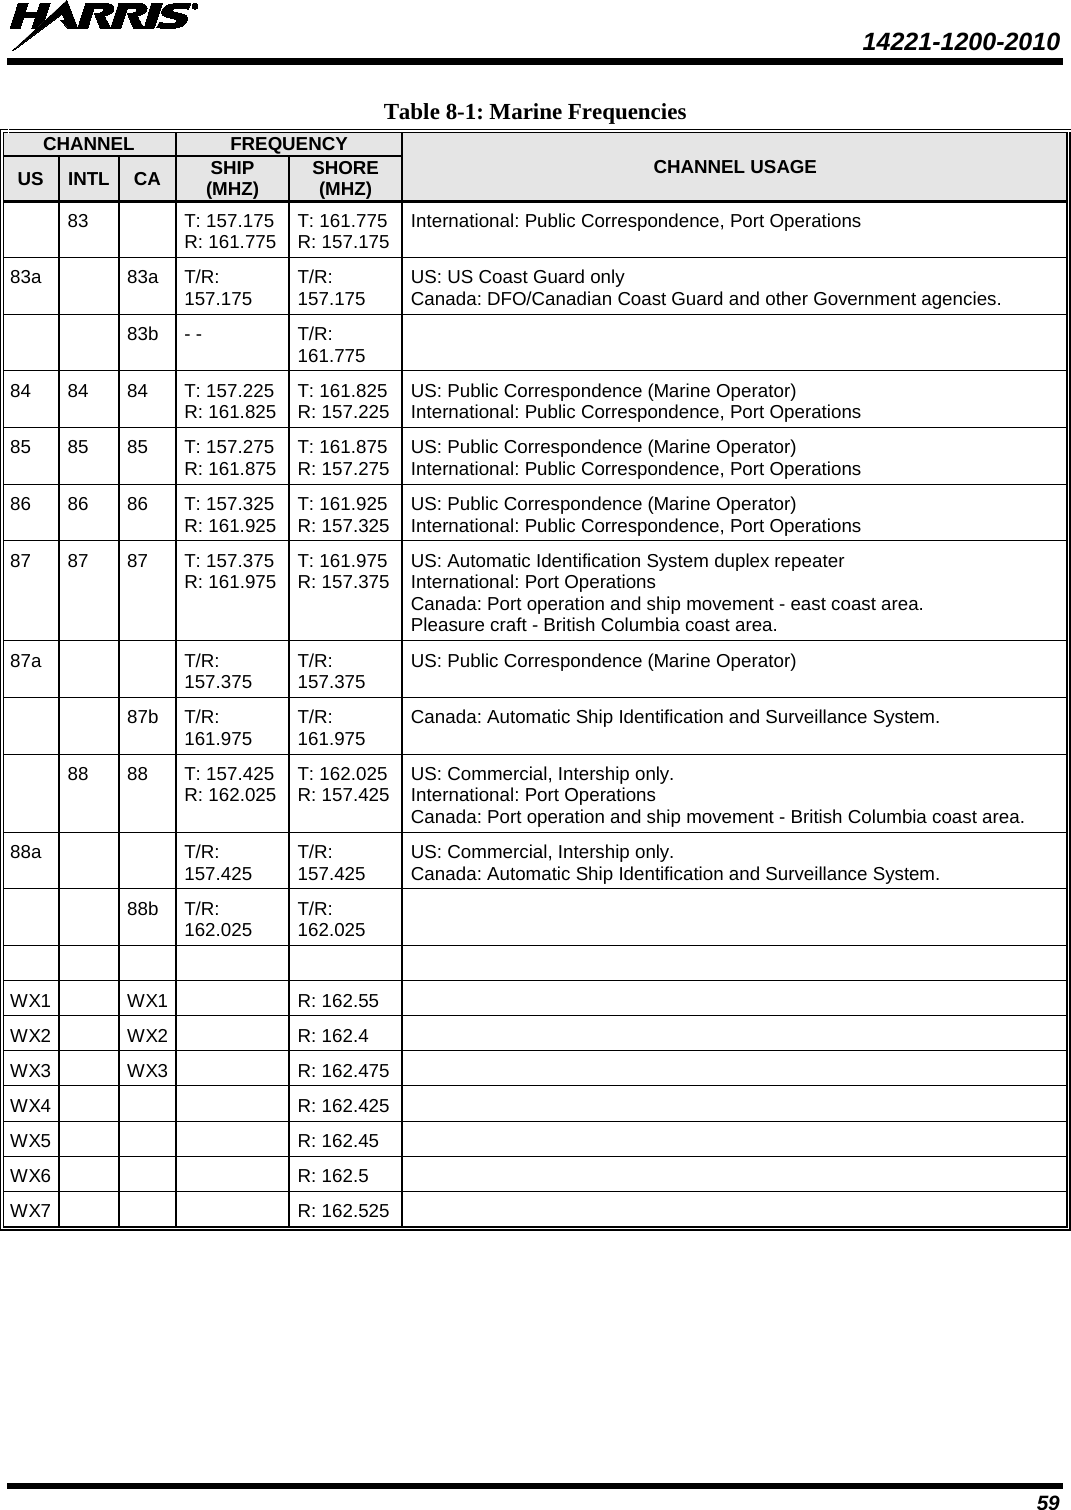  14221-1200-2010 59 Table 8-1: Marine Frequencies CHANNEL FREQUENCY CHANNEL USAGE US INTL CA SHIP (MHZ) SHORE (MHZ)  83  T: 157.175  R: 161.775 T: 161.775 R: 157.175 International: Public Correspondence, Port Operations 83a  83a T/R: 157.175 T/R: 157.175 US: US Coast Guard only Canada: DFO/Canadian Coast Guard and other Government agencies.     83b  - -  T/R: 161.775  84 84 84 T: 157.225  R: 161.825 T: 161.825  R: 157.225 US: Public Correspondence (Marine Operator)  International: Public Correspondence, Port Operations 85 85 85 T: 157.275 R: 161.875 T: 161.875  R: 157.275 US: Public Correspondence (Marine Operator)  International: Public Correspondence, Port Operations 86 86 86 T: 157.325  R: 161.925 T: 161.925 R: 157.325 US: Public Correspondence (Marine Operator)  International: Public Correspondence, Port Operations 87 87 87 T: 157.375  R: 161.975 T: 161.975 R: 157.375 US: Automatic Identification System duplex repeater International: Port Operations Canada: Port operation and ship movement - east coast area. Pleasure craft - British Columbia coast area. 87a   T/R: 157.375 T/R: 157.375 US: Public Correspondence (Marine Operator)      87b T/R: 161.975 T/R: 161.975 Canada: Automatic Ship Identification and Surveillance System.  88 88 T: 157.425  R: 162.025 T: 162.025 R: 157.425 US: Commercial, Intership only.  International: Port Operations Canada: Port operation and ship movement - British Columbia coast area. 88a   T/R: 157.425 T/R: 157.425 US: Commercial, Intership only.  Canada: Automatic Ship Identification and Surveillance System.     88b T/R: 162.025 T/R: 162.025        WX1  WX1  R: 162.55  WX2  WX2  R: 162.4  WX3  WX3  R: 162.475  WX4    R: 162.425  WX5    R: 162.45  WX6    R: 162.5  WX7    R: 162.525  